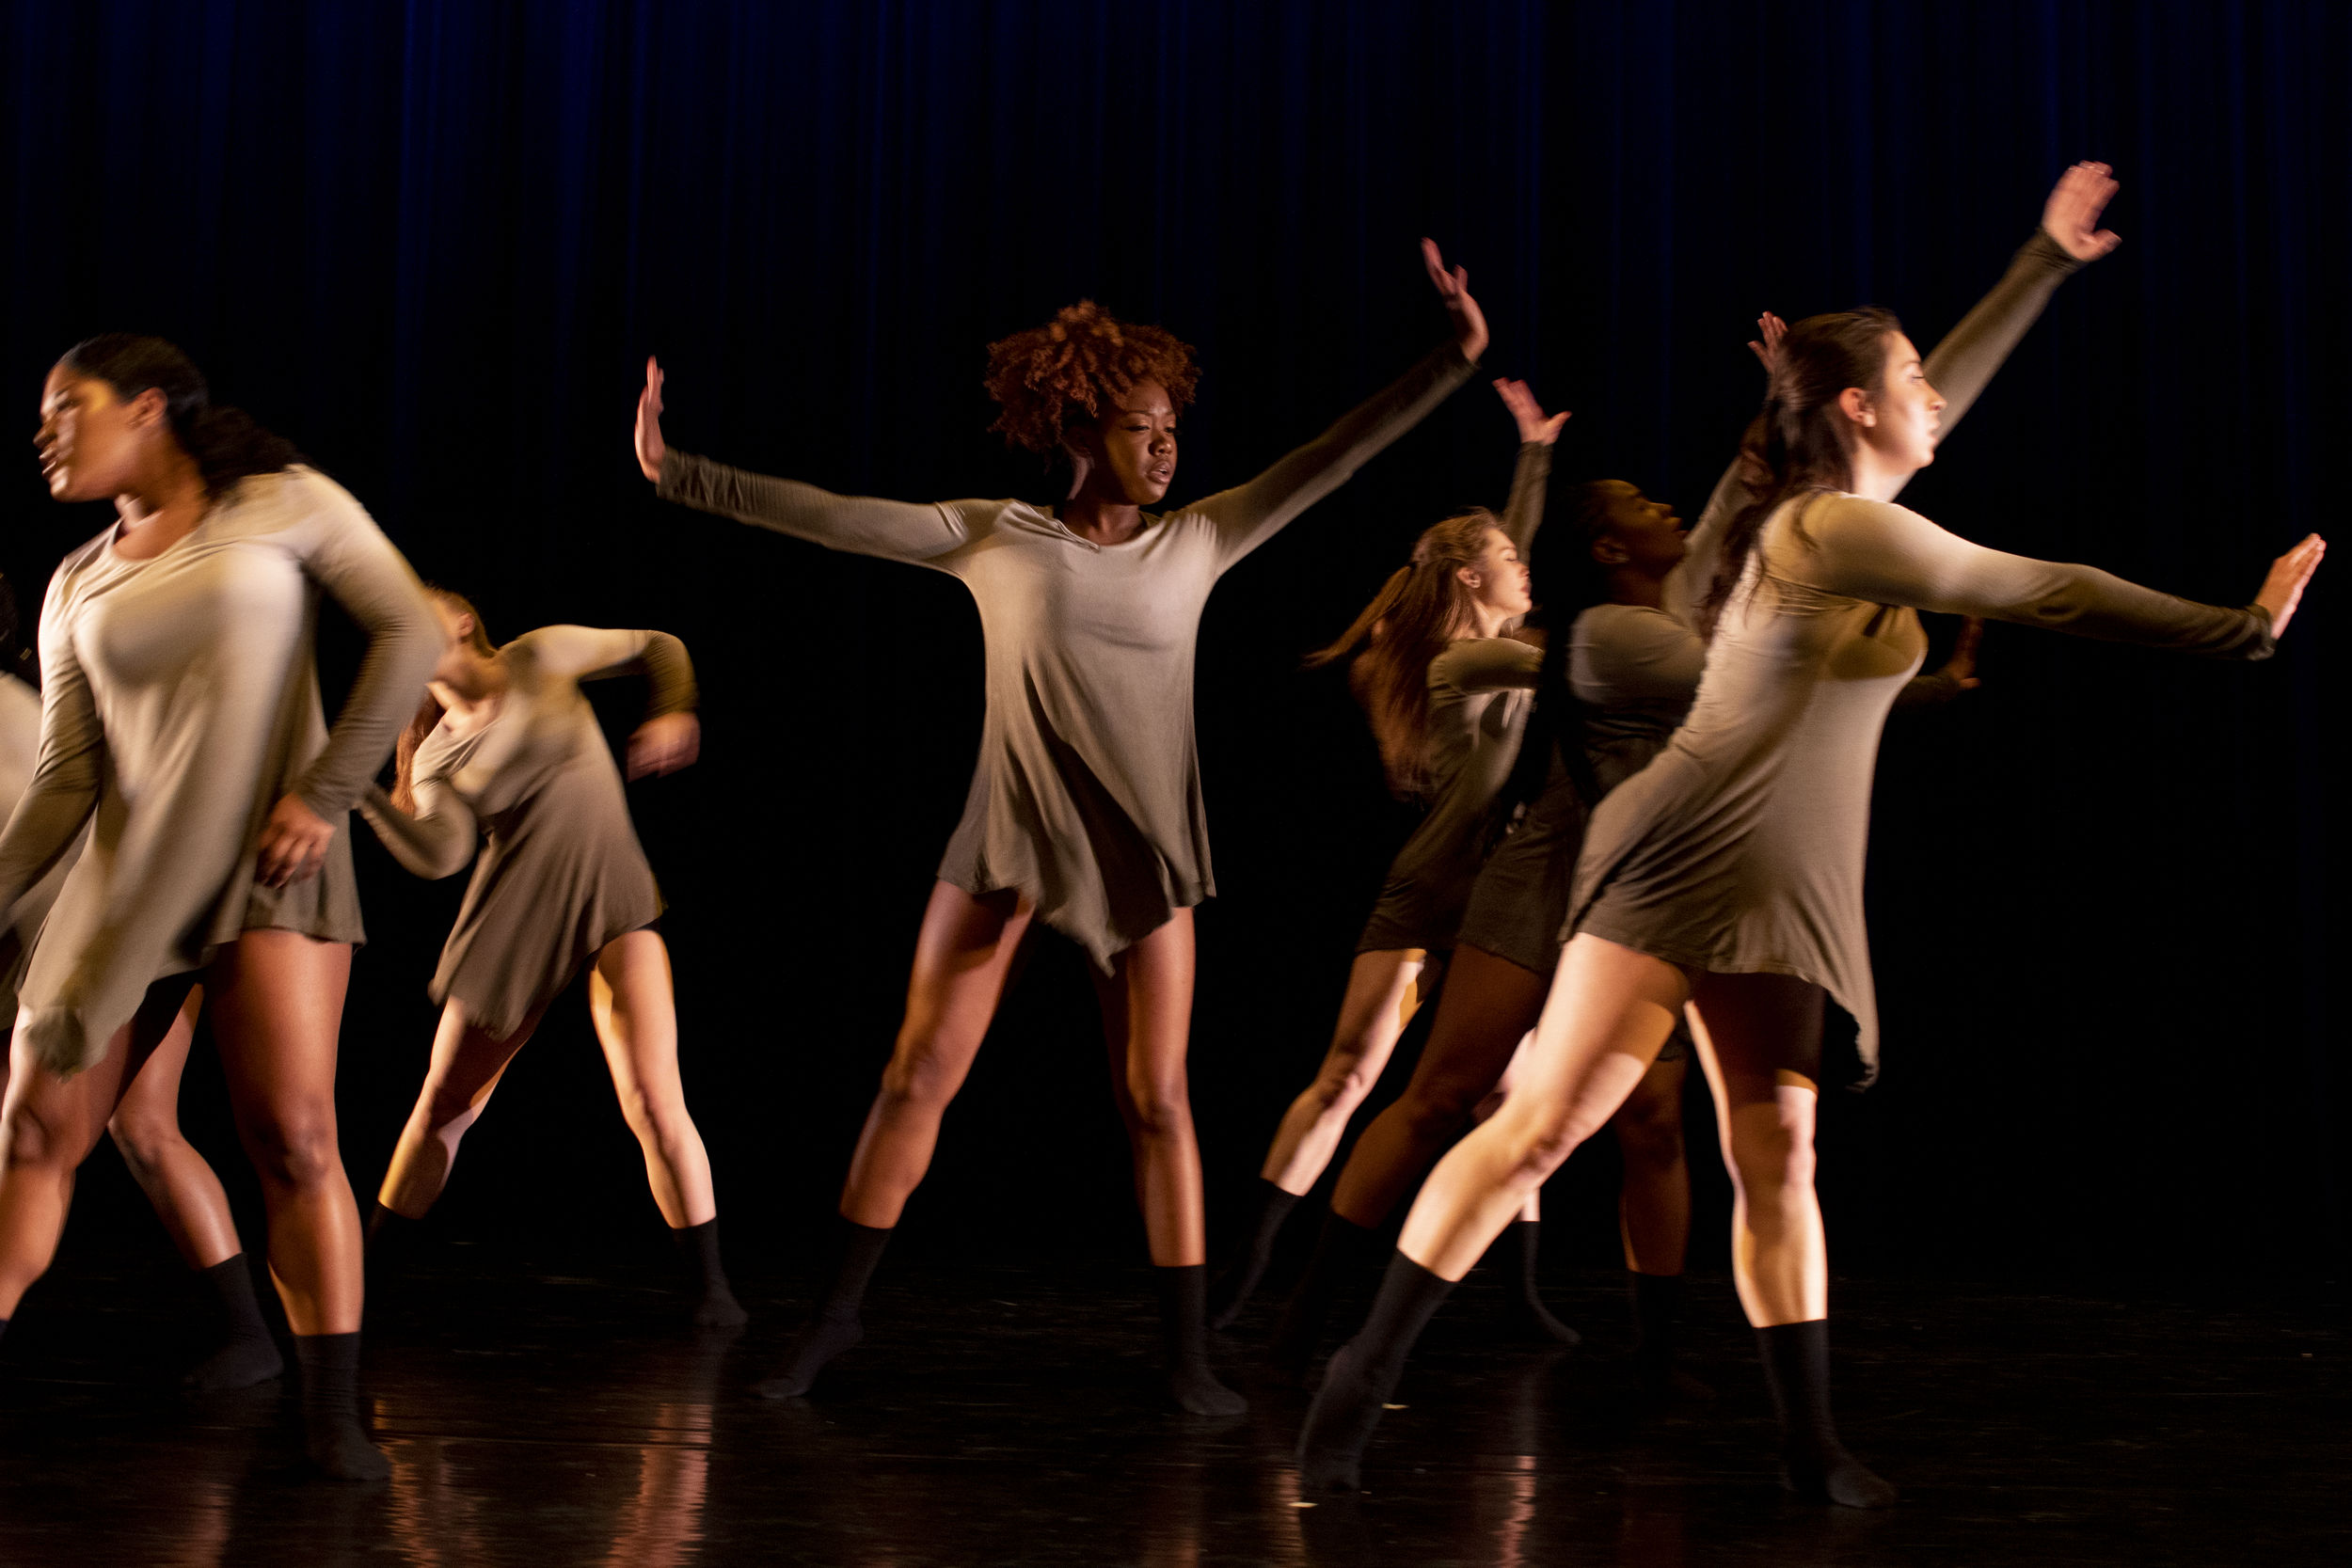 A dance performance by students in the Boyer College of Music and Dance.